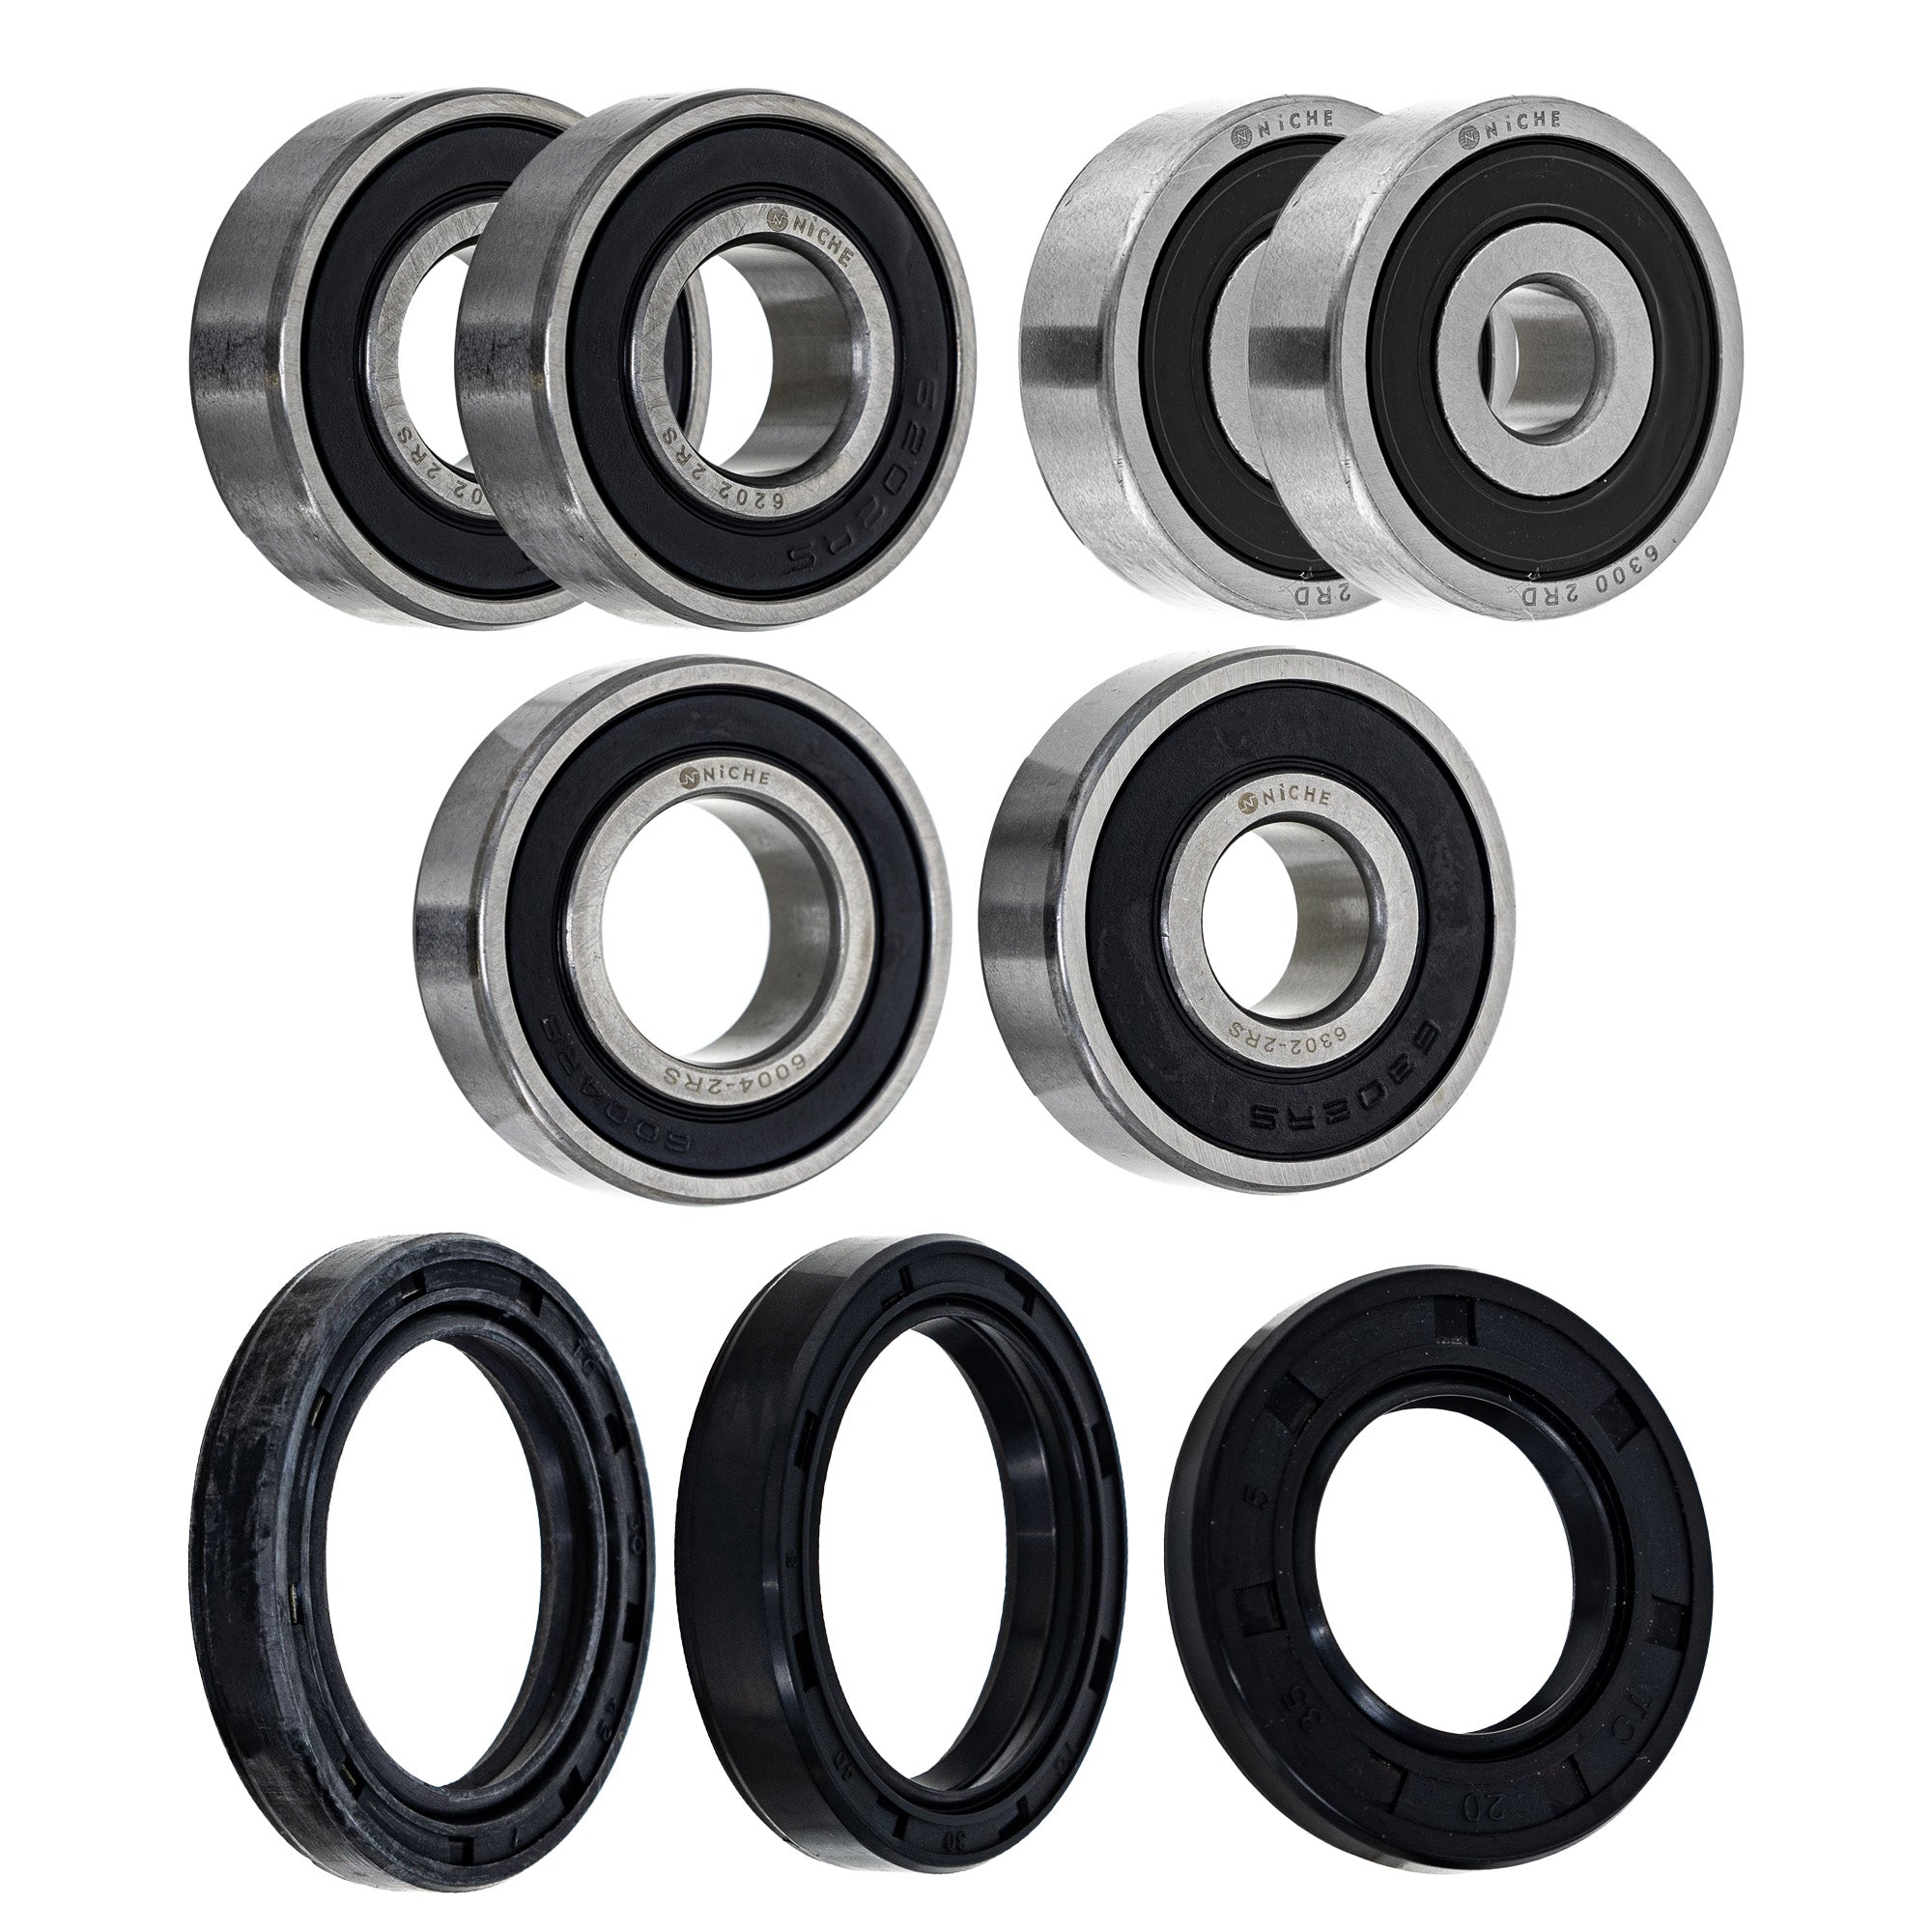 Wheel Bearing Seal Kit for zOTHER Ref No RD60 NICHE MK1008628